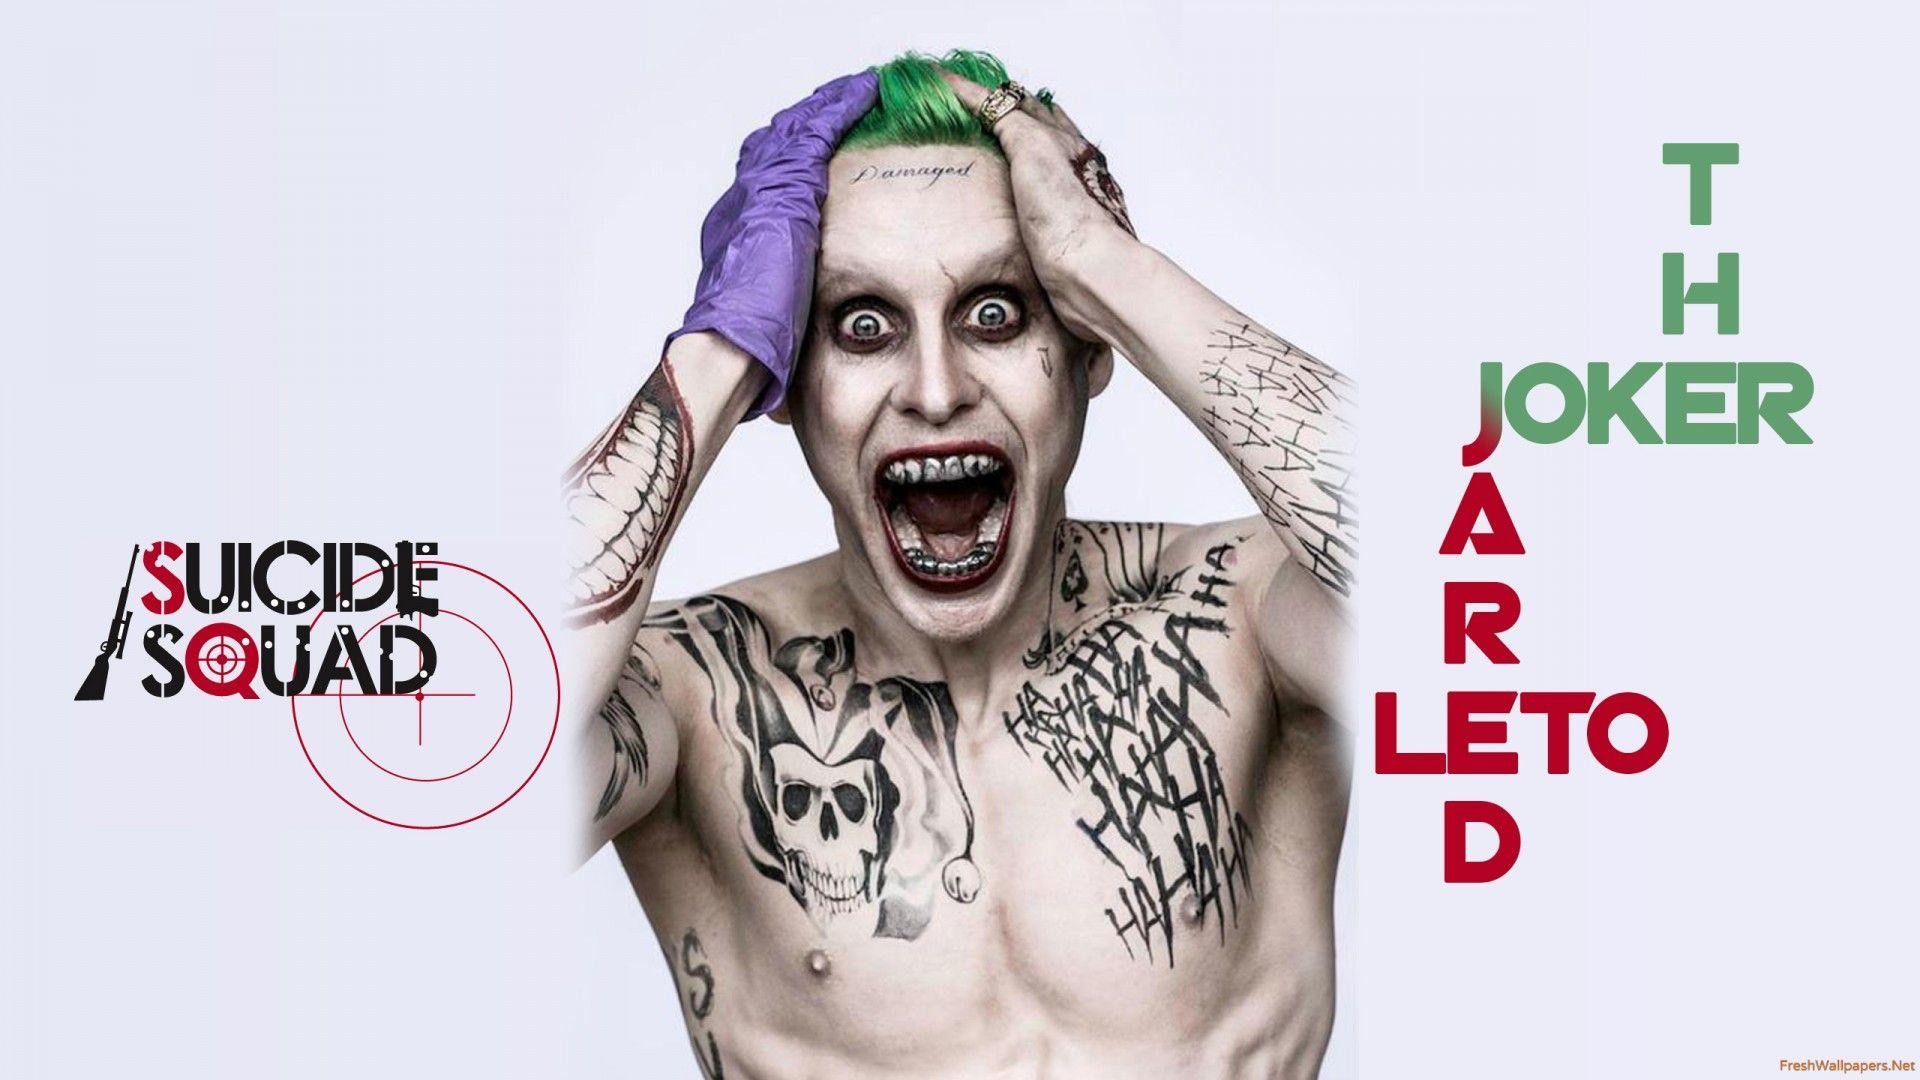 The Joker In Suicide Squad wallpapers | Freshwallpapers